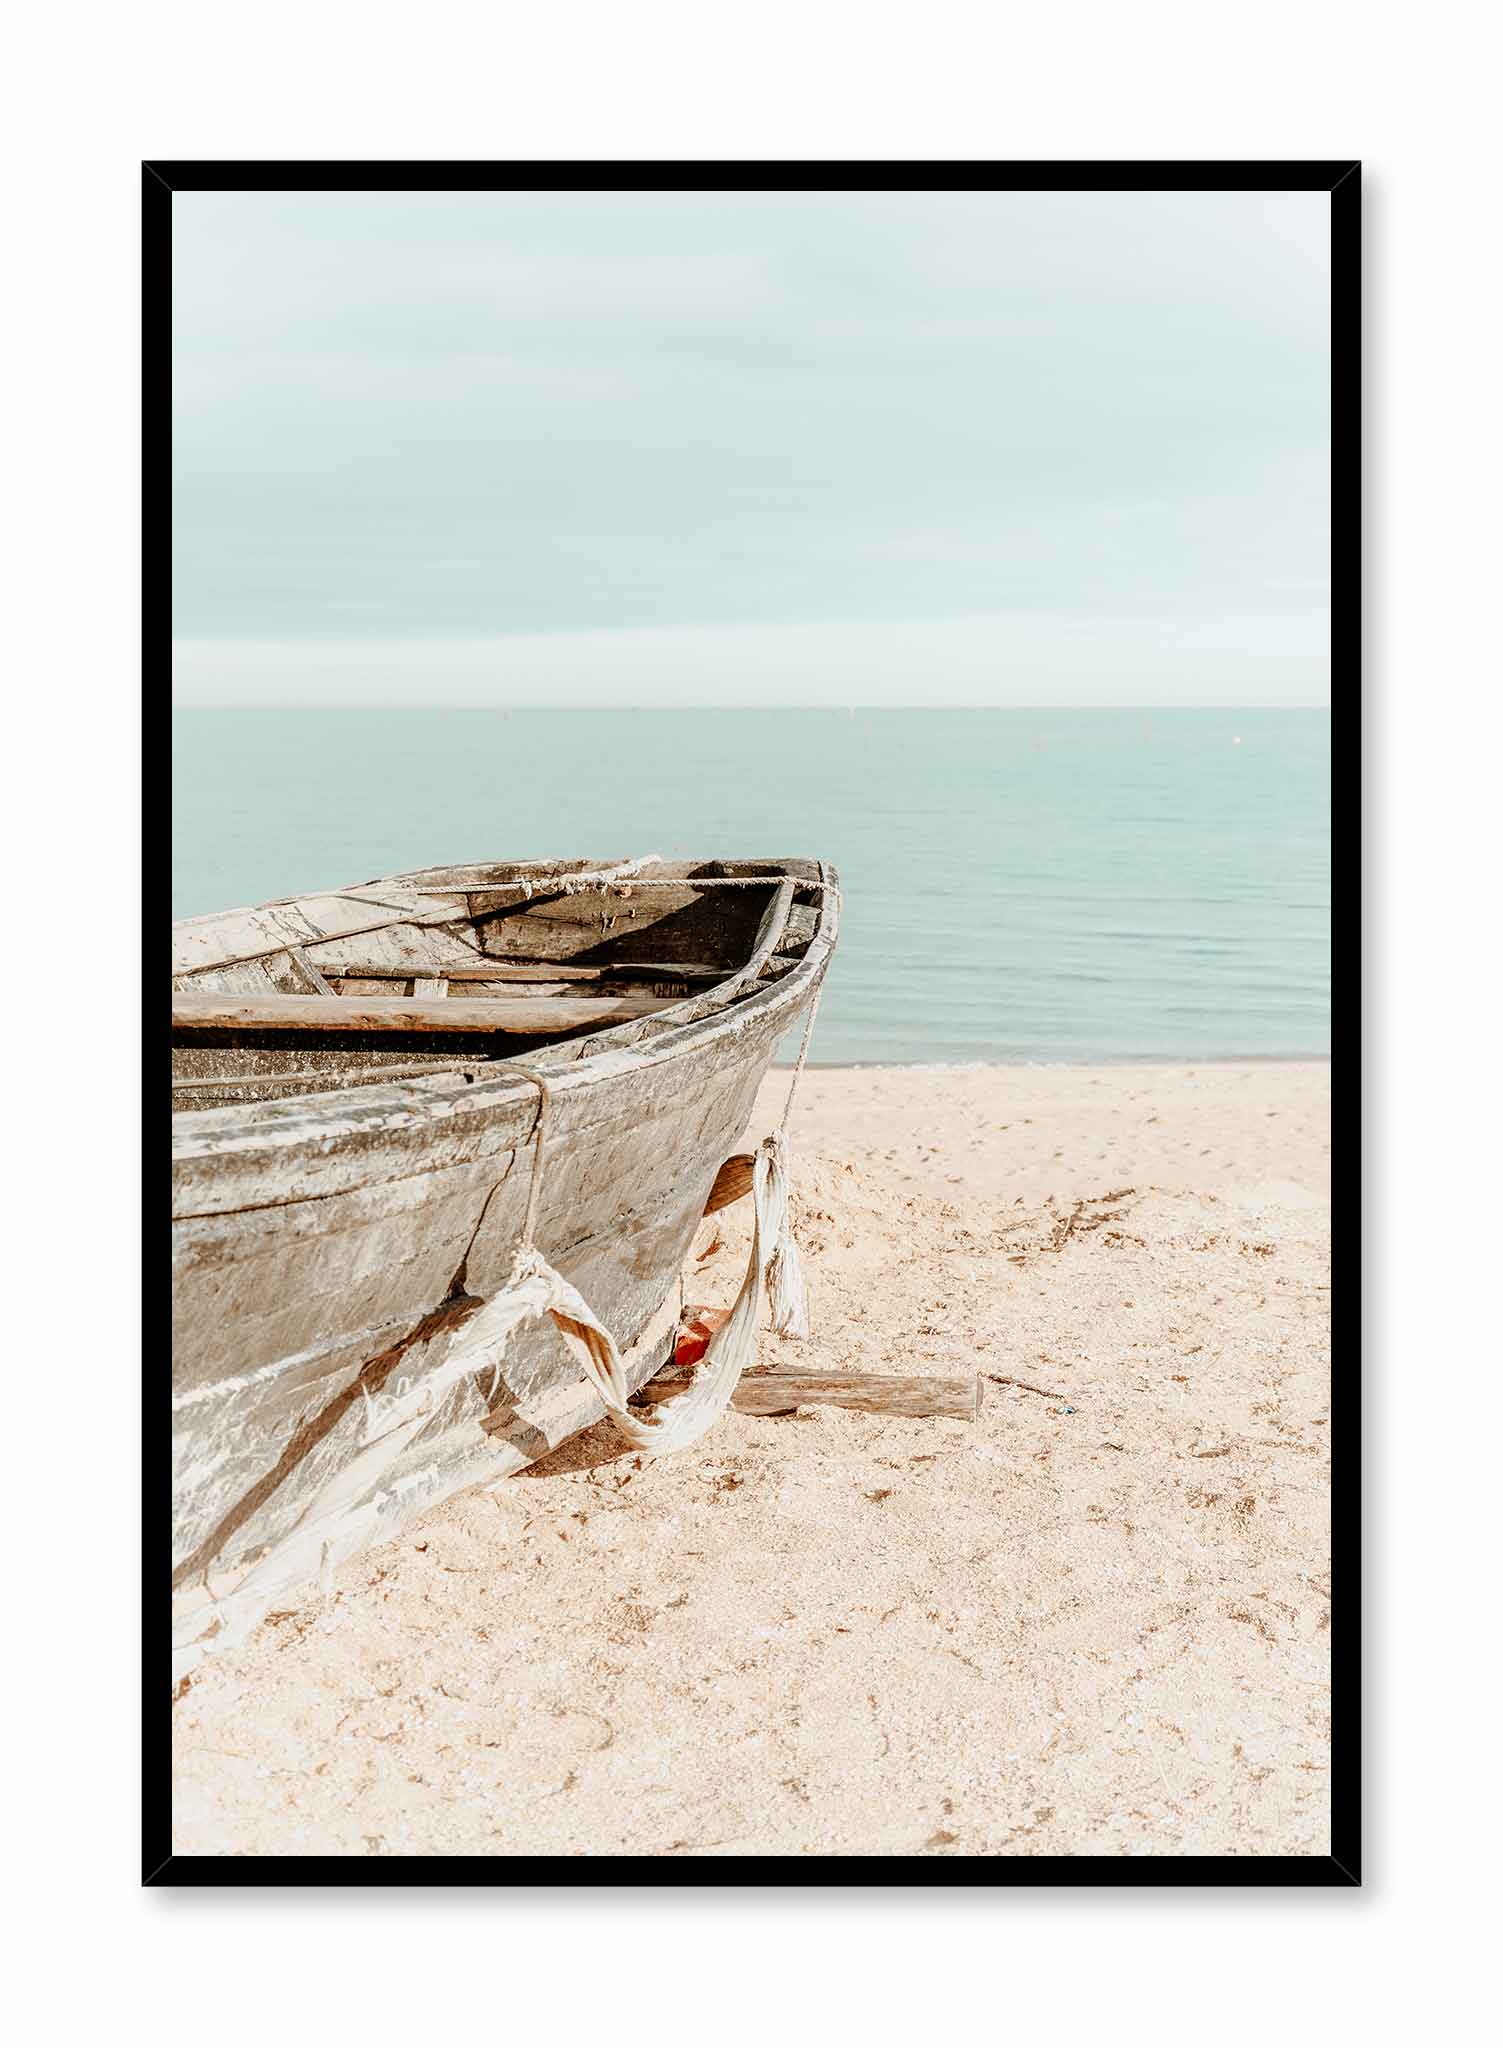 Fisherman's Friend is a minimalist photography of a worn-out traditional fisher boat on a sandy beach in bright sunlight by Opposite Wall.